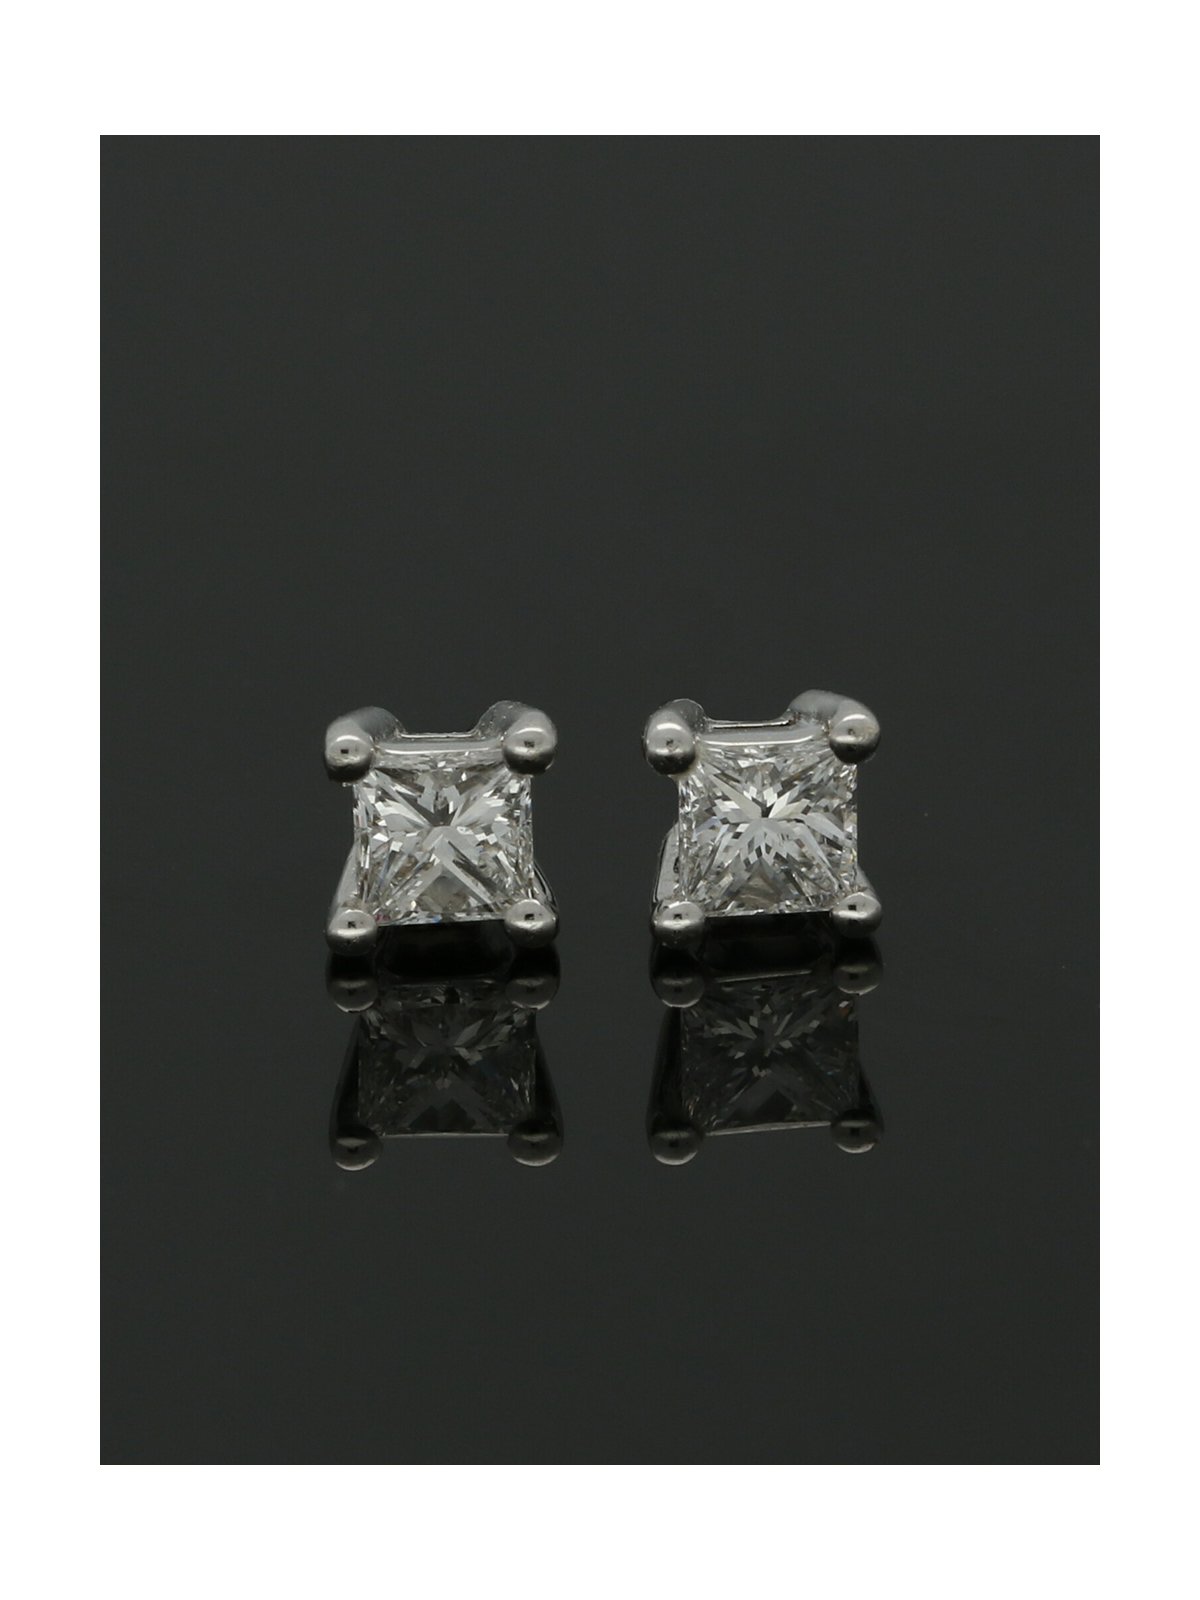 Diamond Solitaire Stud Earrings "The Grace Collection" 0.30ct Princess Cut in 18ct White Gold